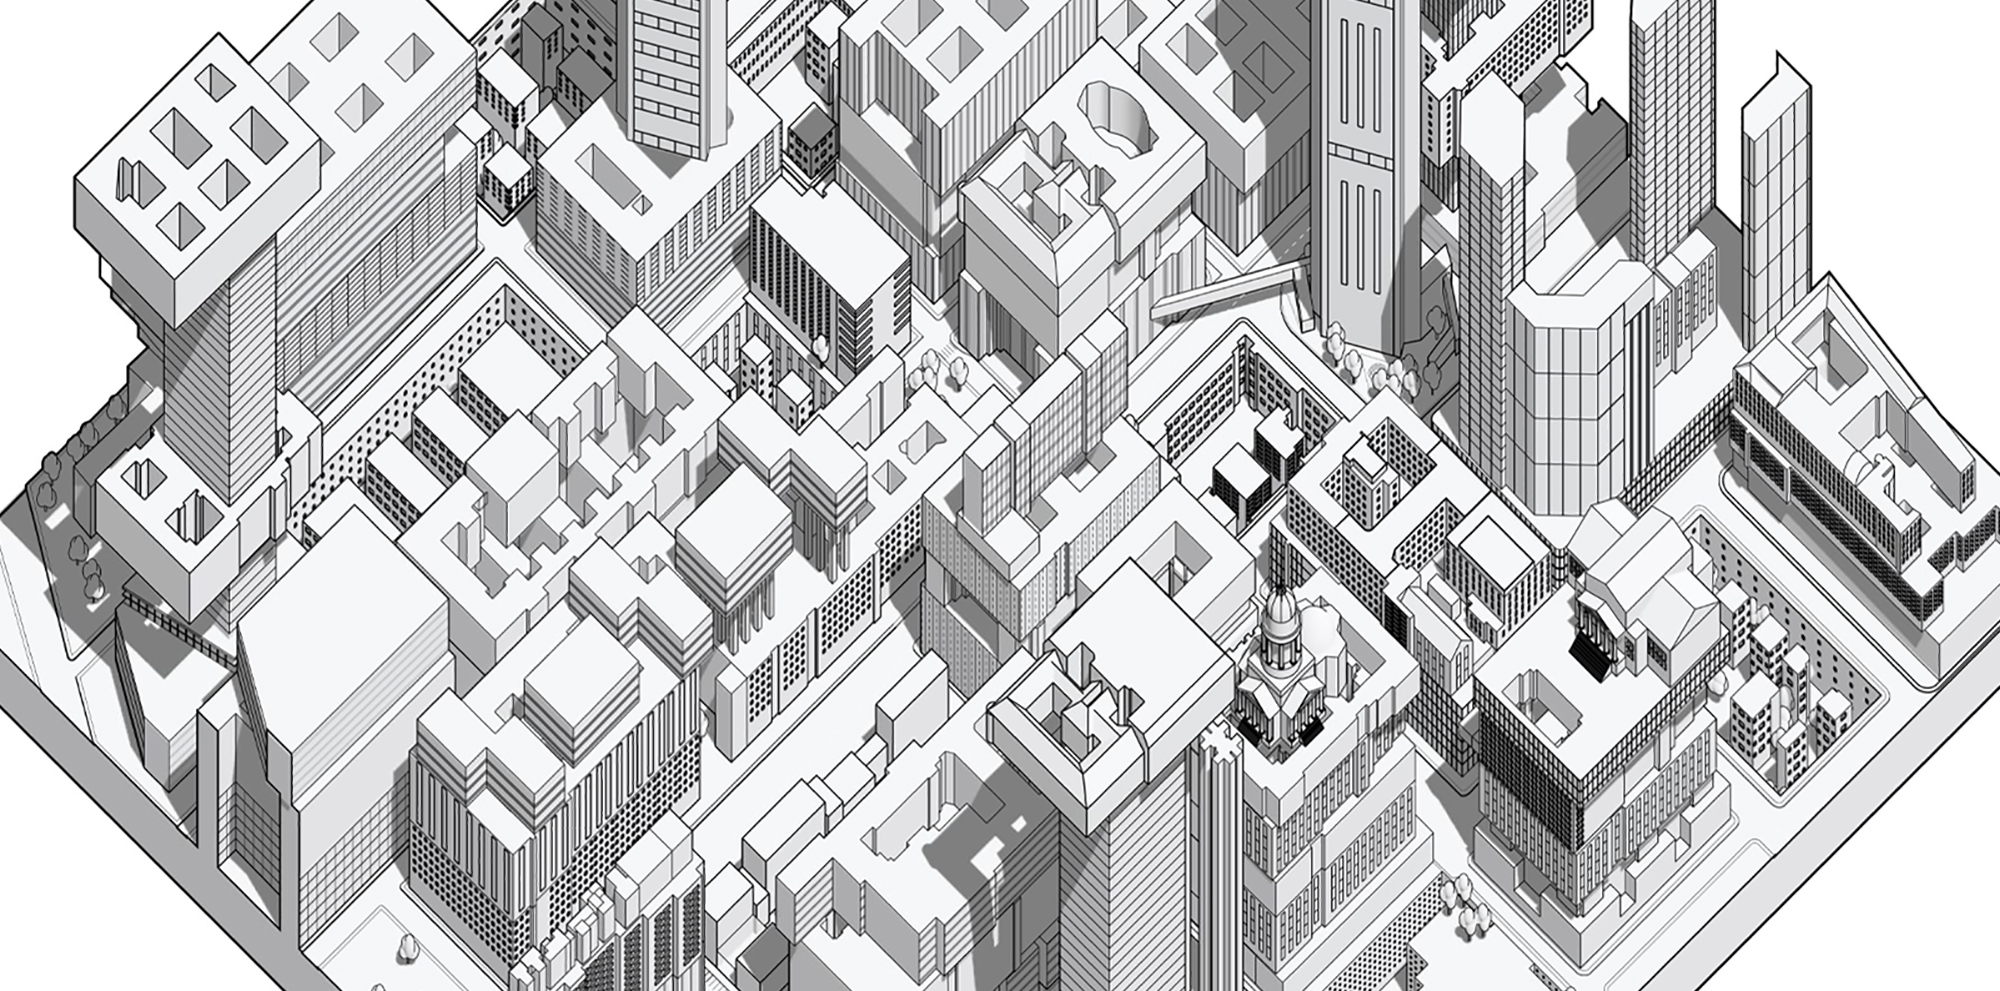 Yousif Giyo, The Epic Highs and Lows of Stacking Courtyards, 2021